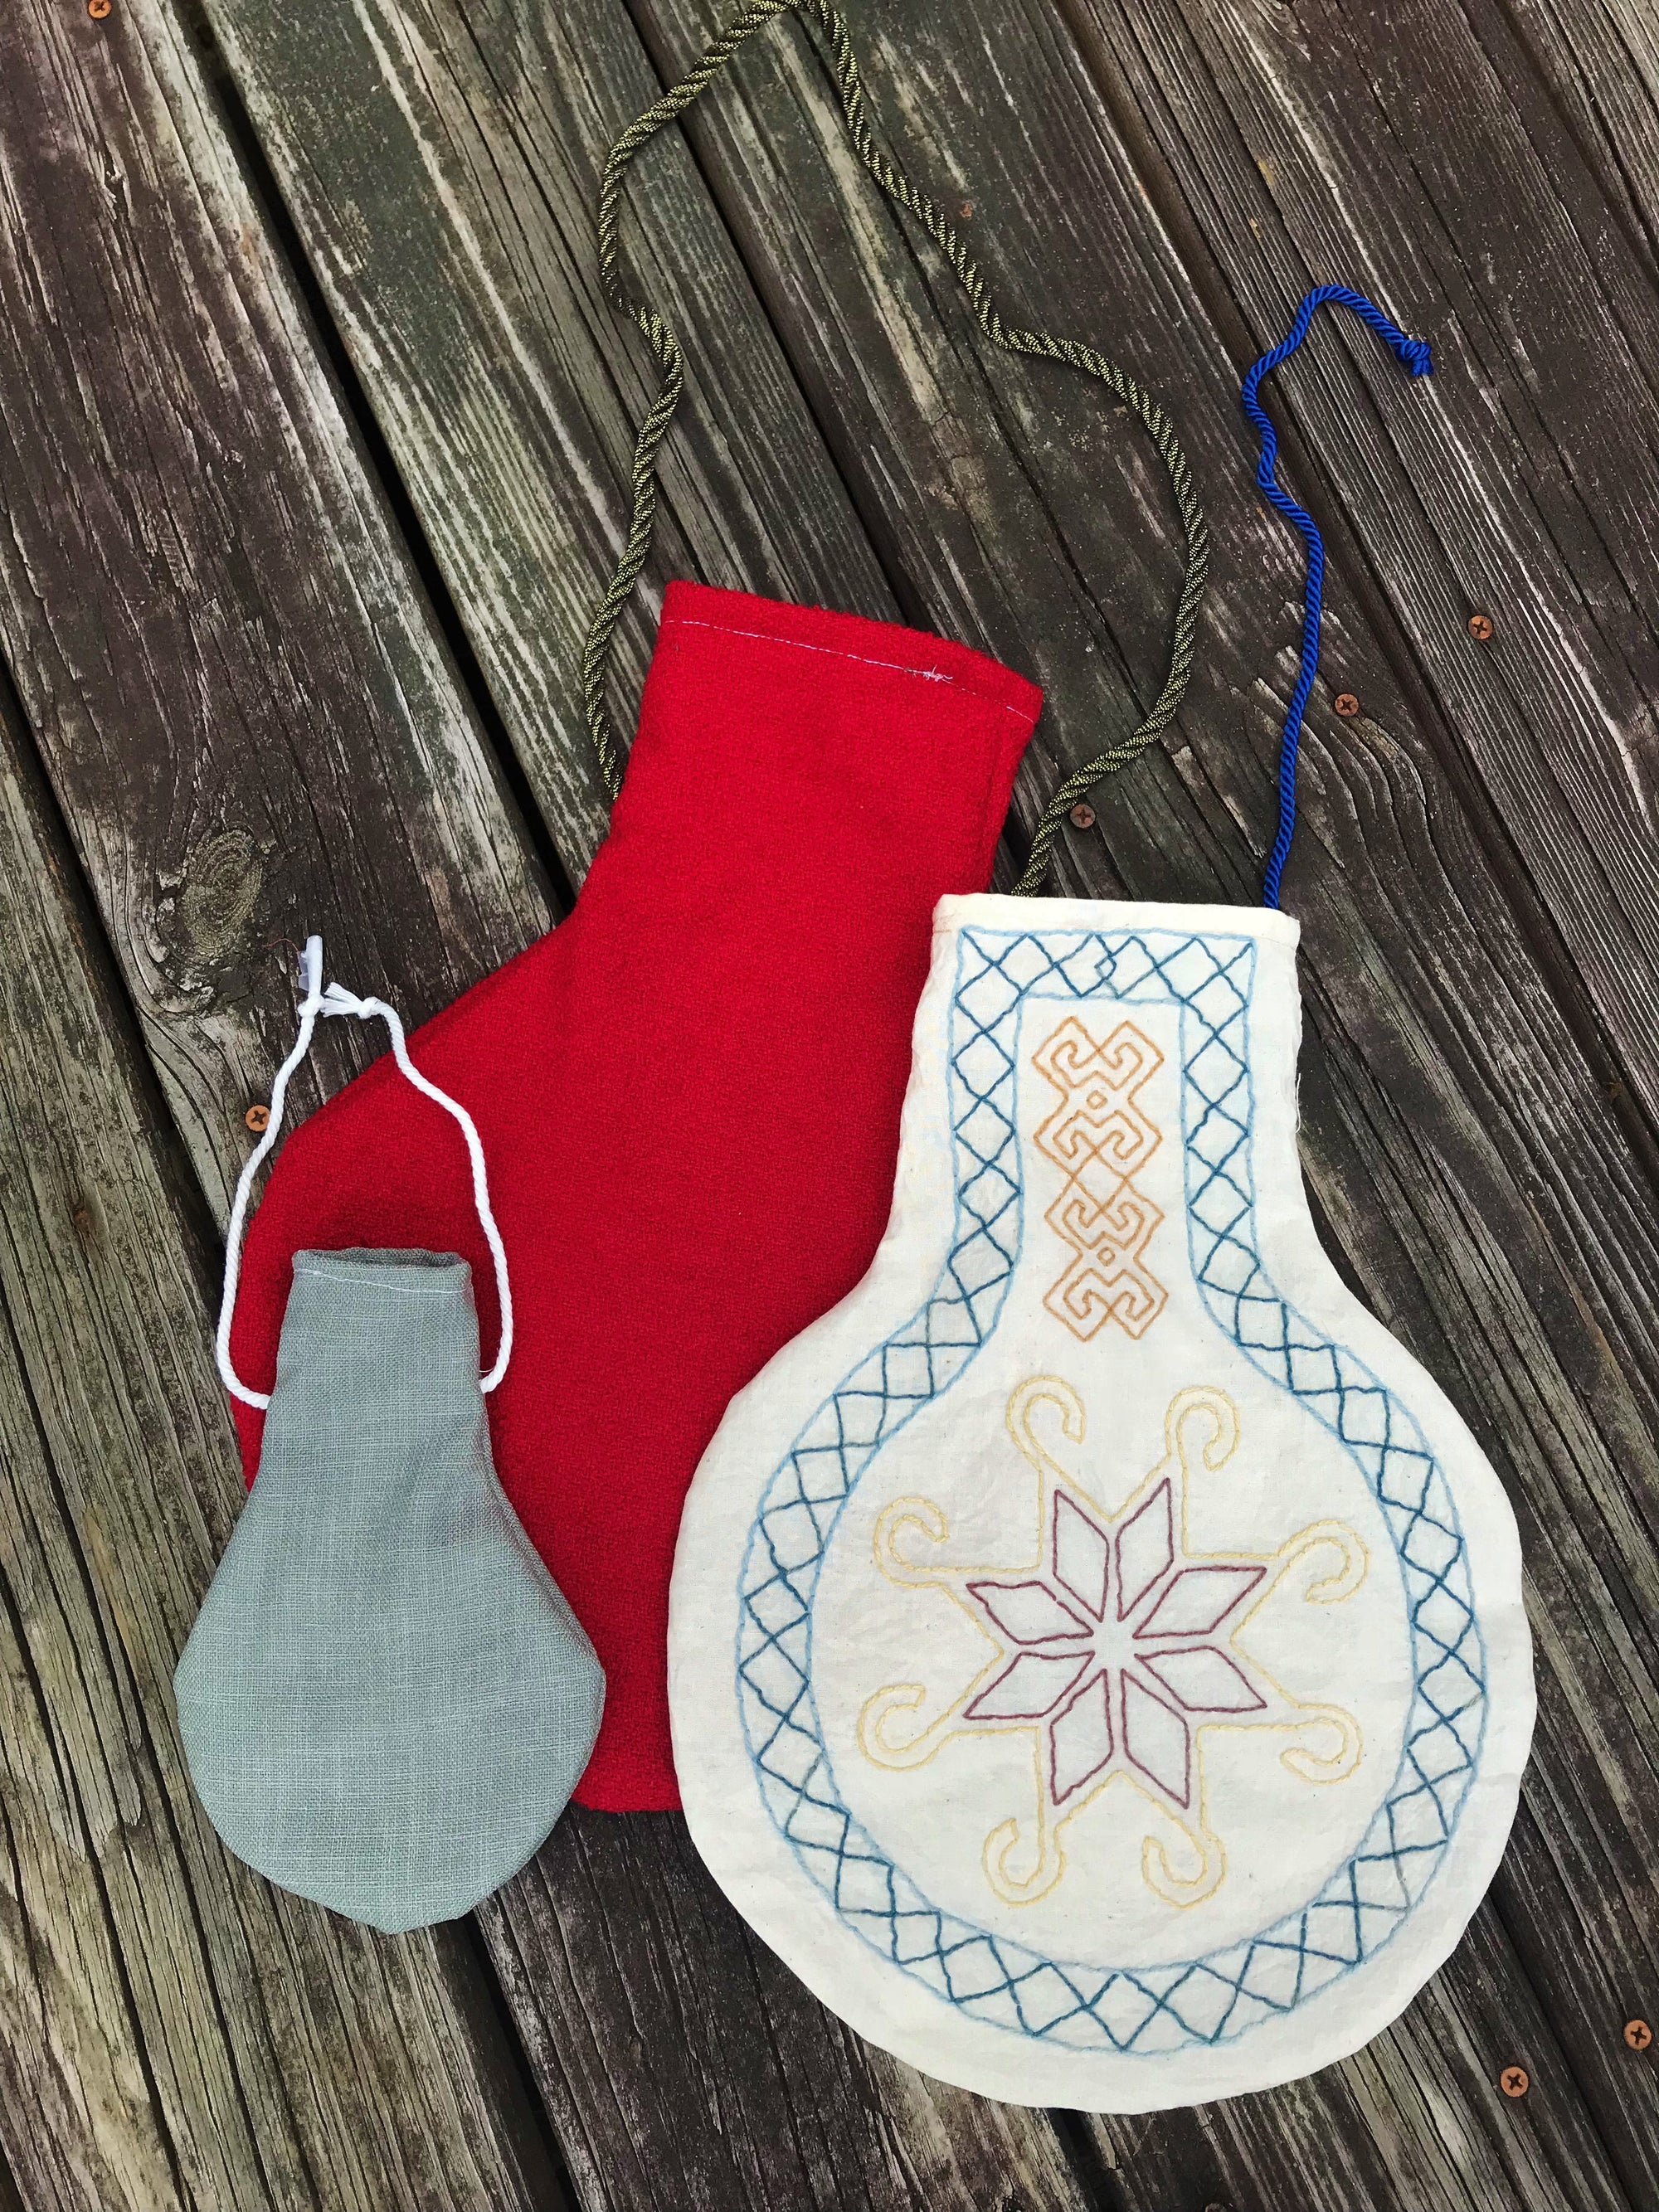 Three Uzbek pouches - 1 small grey with white drawstring; 1 large red with gold drawstring, and one large cream colored with red, blue, and yellow embroidery.